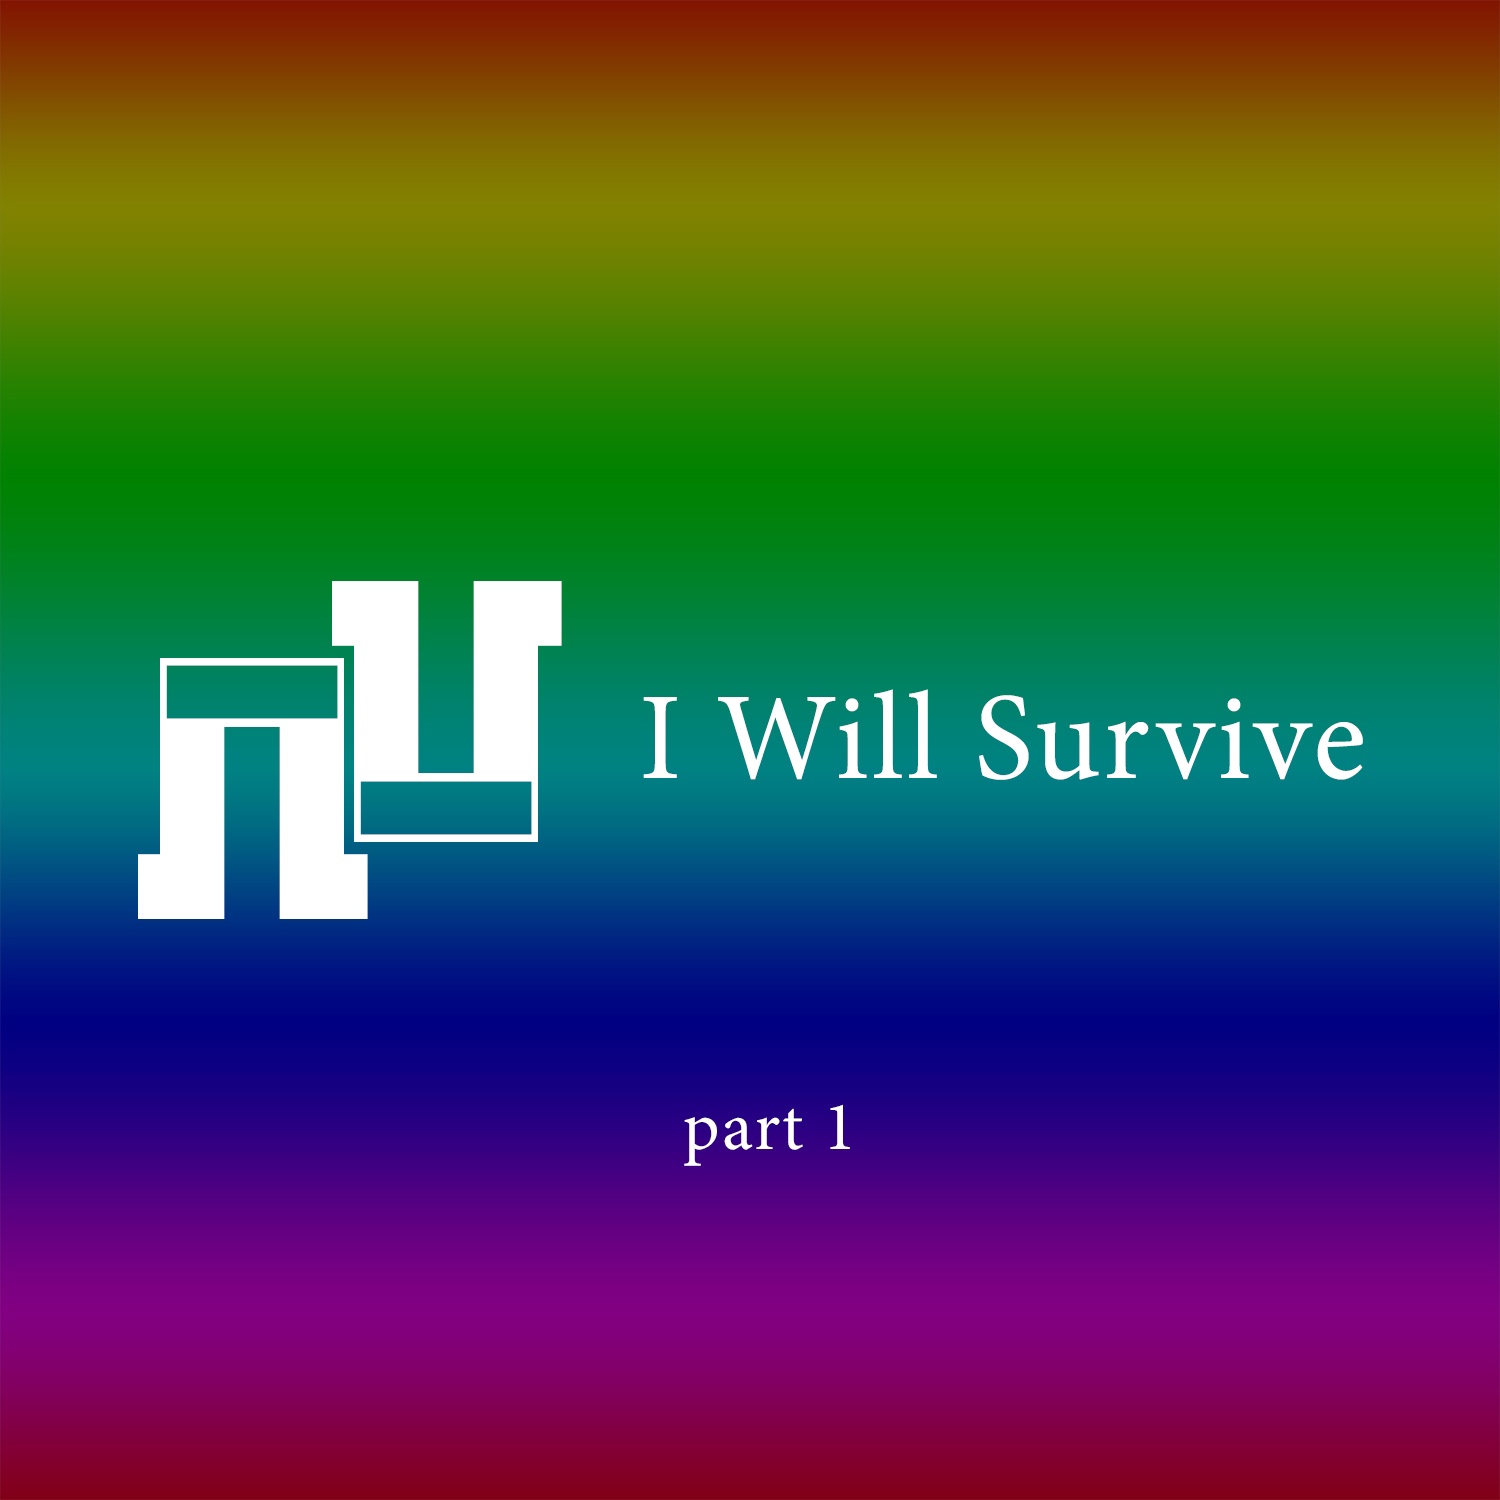 I Will Survive /part 1/